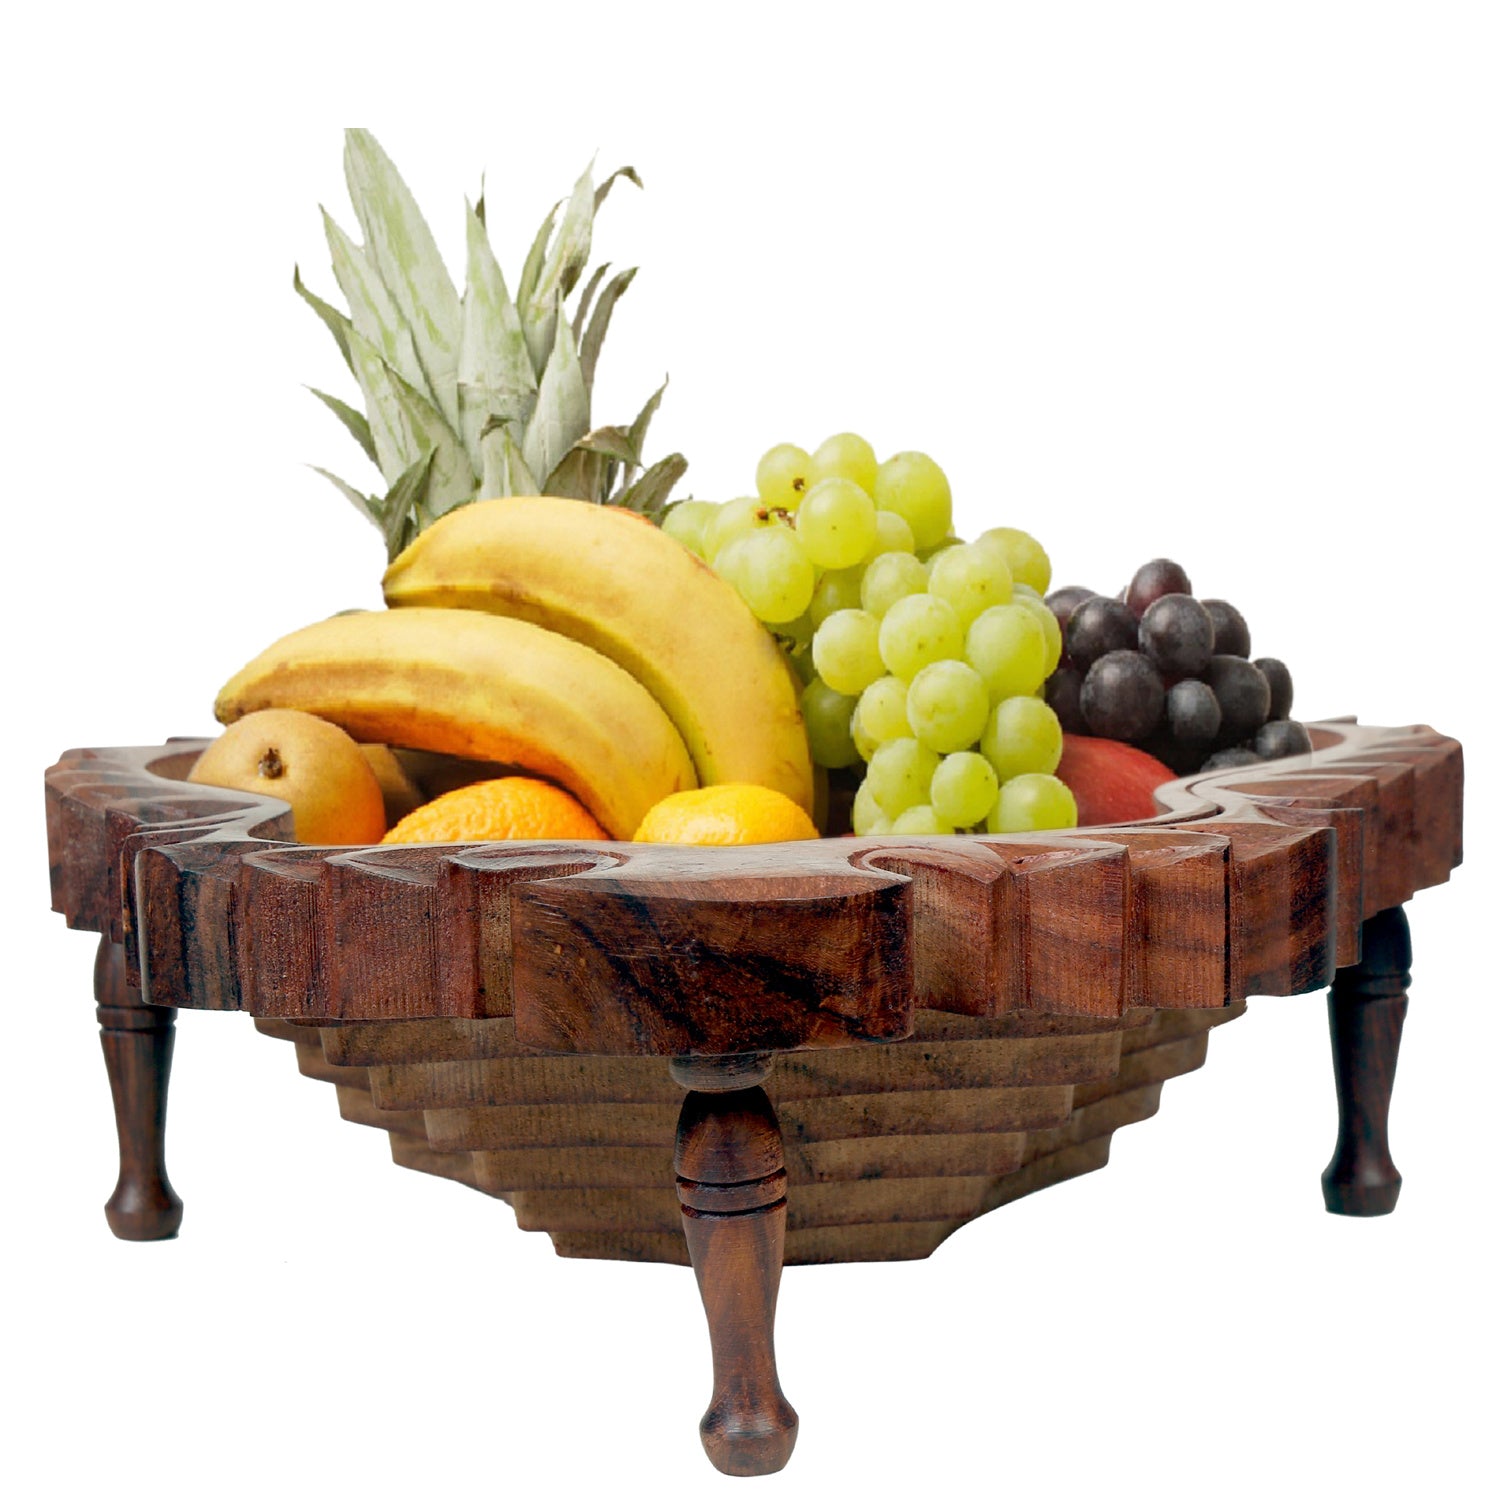 A Wooden Handmade Collapsible Foldable Fruit Basket Serving Bowl with a leaf-shaped design, crafted from Sheesham wood.